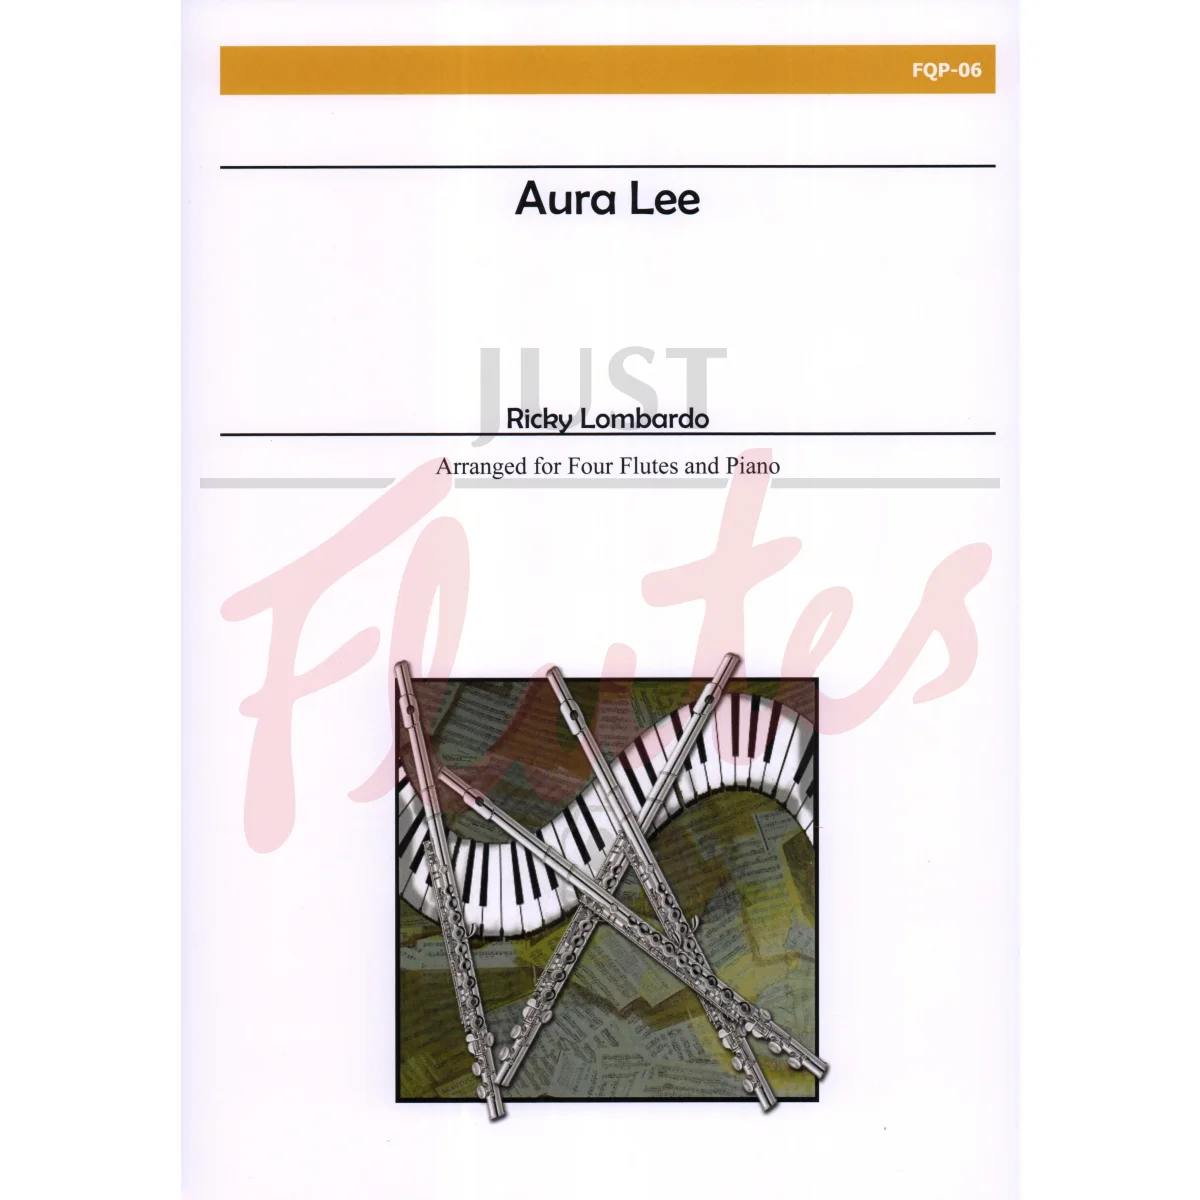 Aura Lee for Four Flutes and Piano